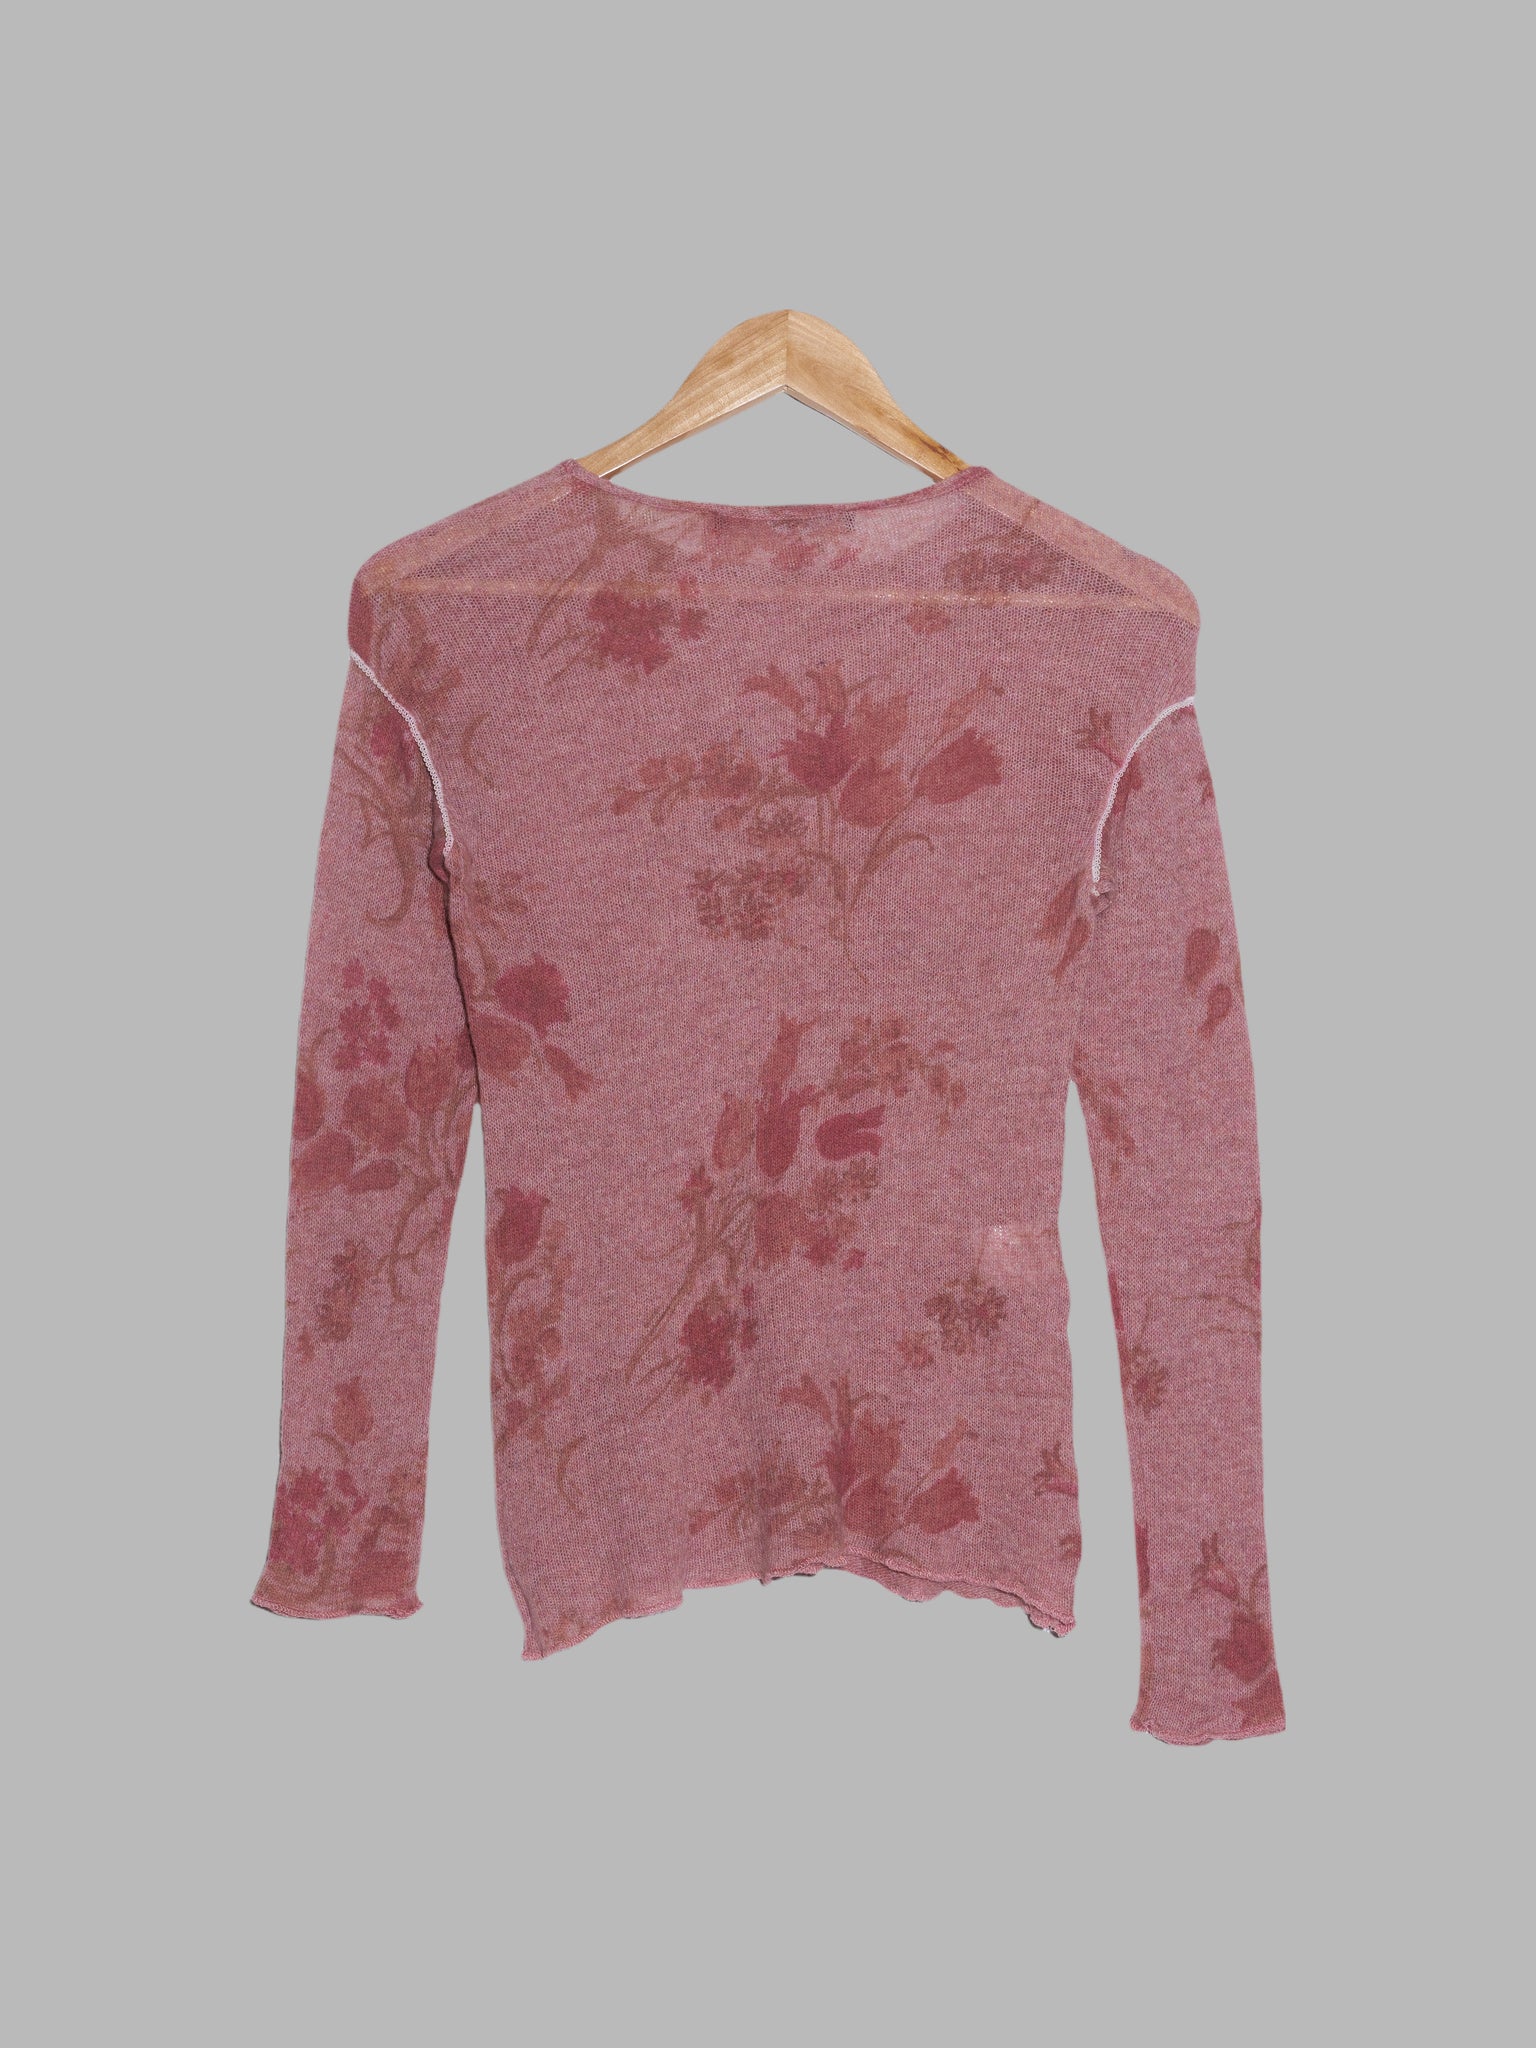 Jean Colonna pink floral print wool long sleeve top with white lace armhole - M